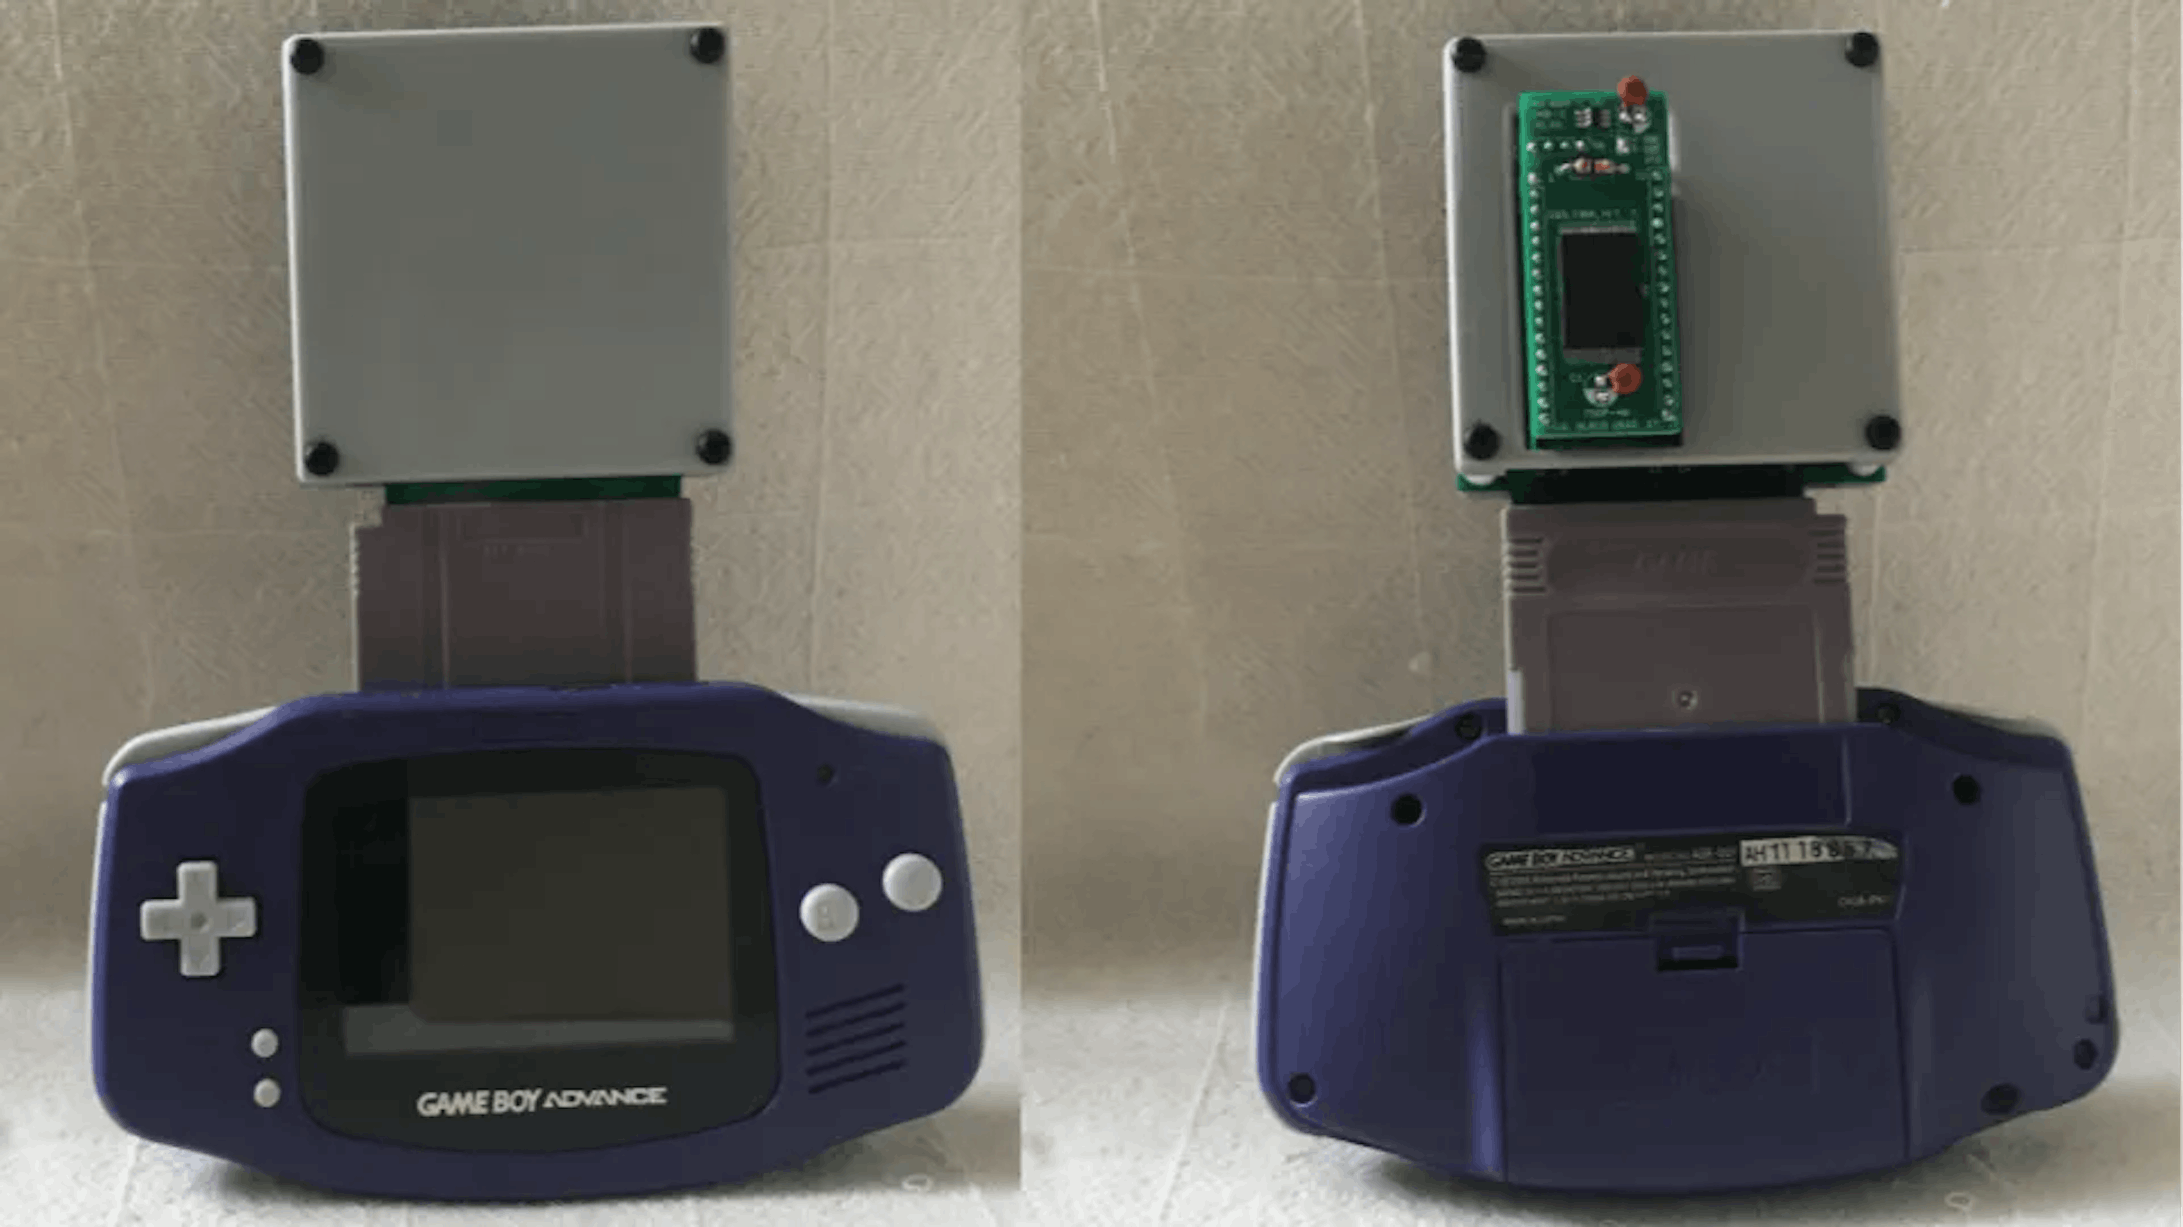 leje bark Ko Squareboi Is the Open Source Game Boy Color Cartridge System You Need -  Hackster.io